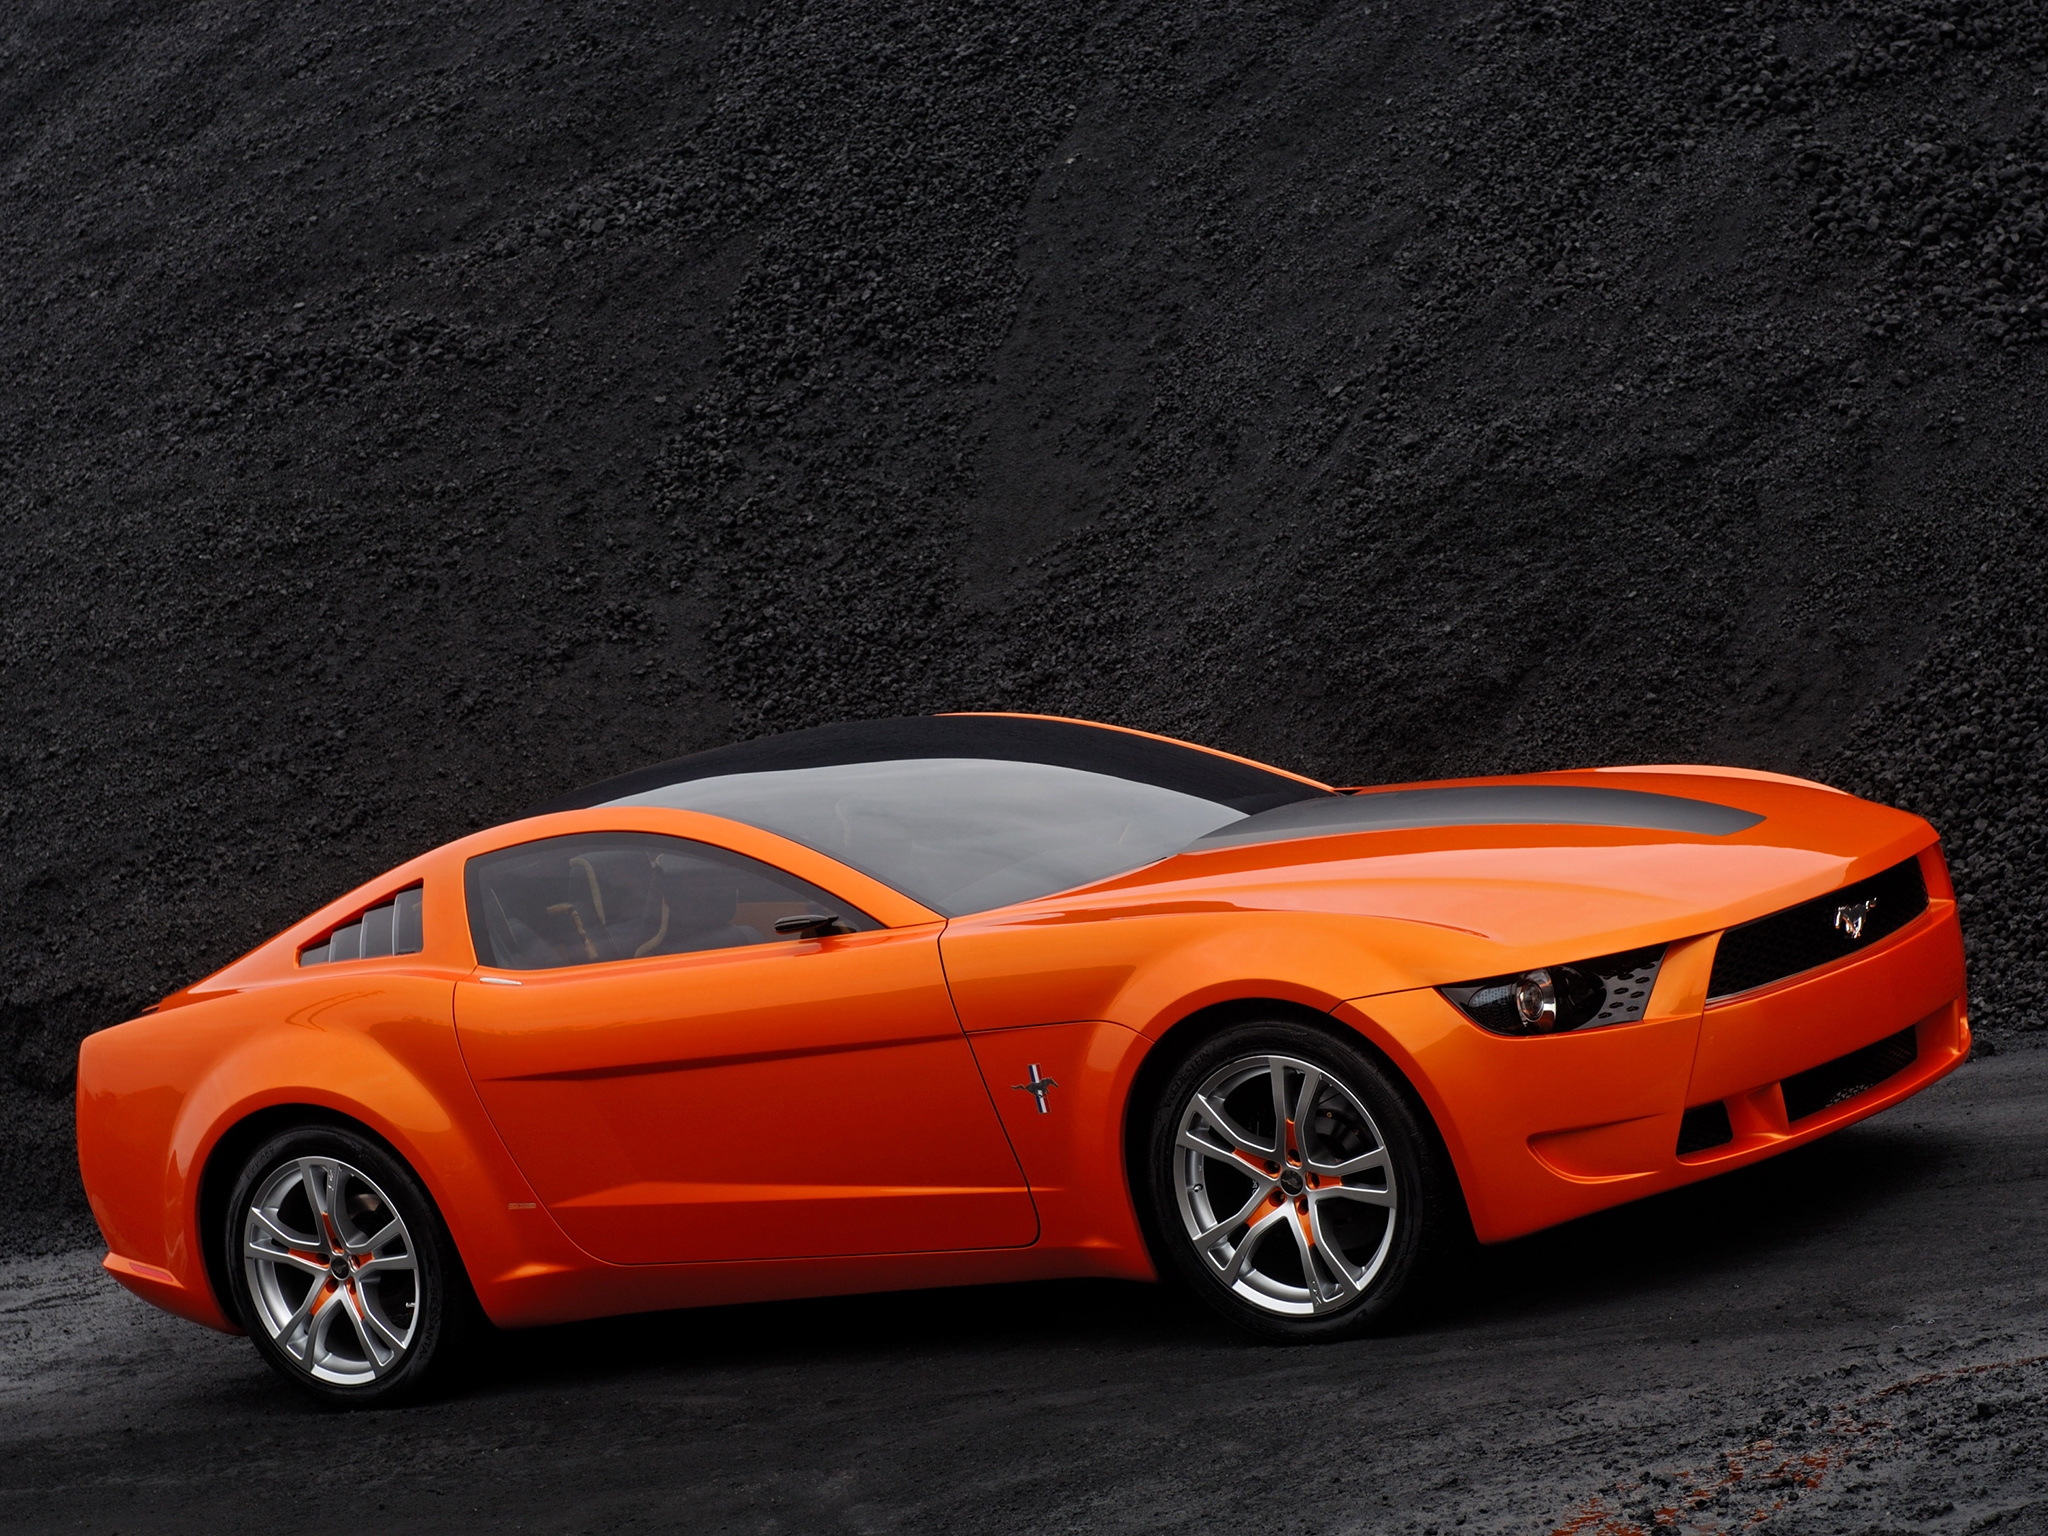 Car Vehicle Ford Ford Mustang Italdesign Mustang By Giugiaro Orange Cars Sports Car Concept Cars Bla 2048x1536